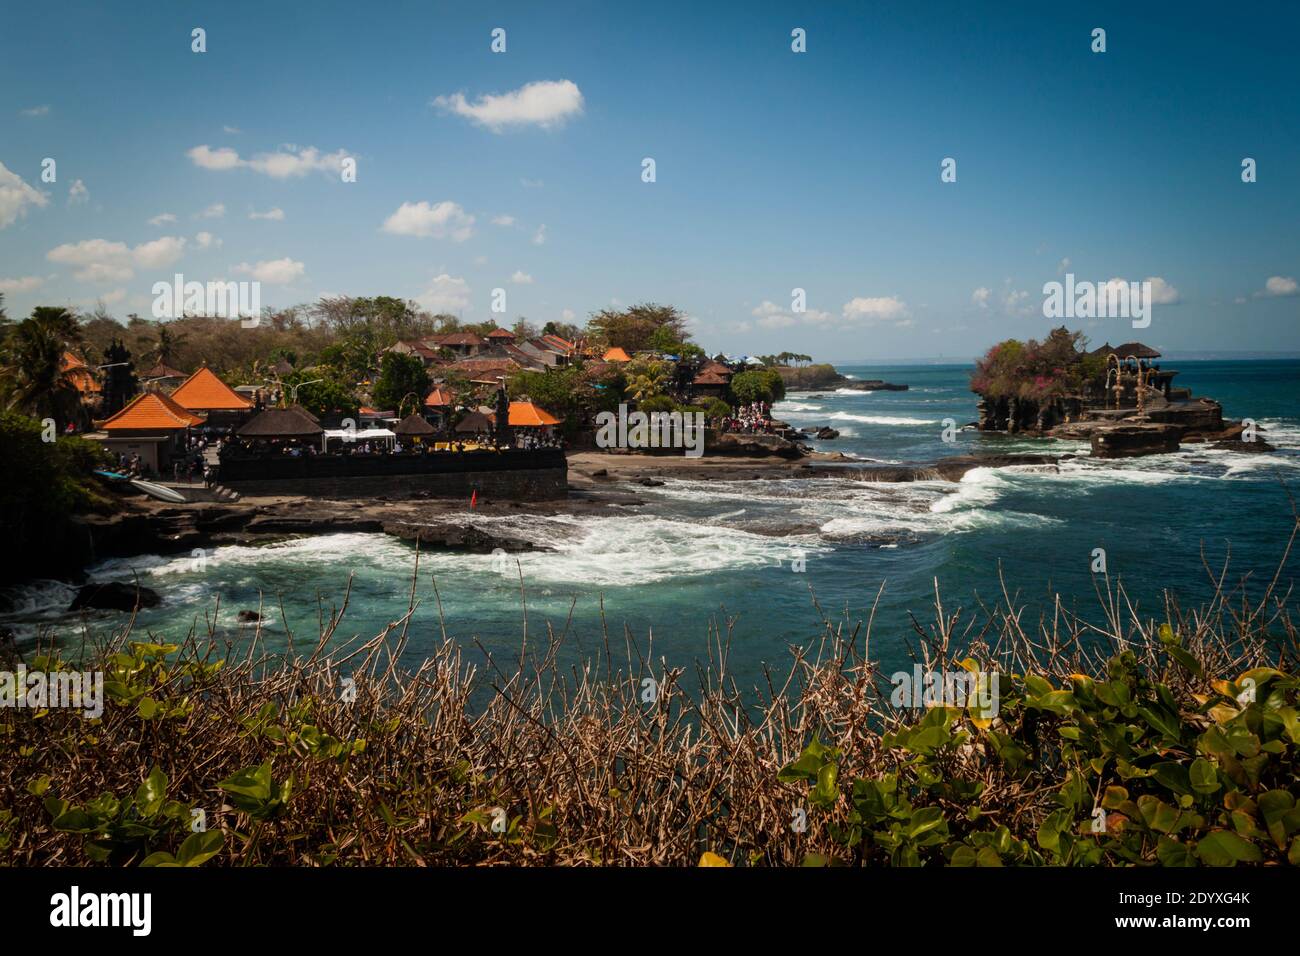 Tanah Lot Temple seen from distance on a viewpoint Stock Photo